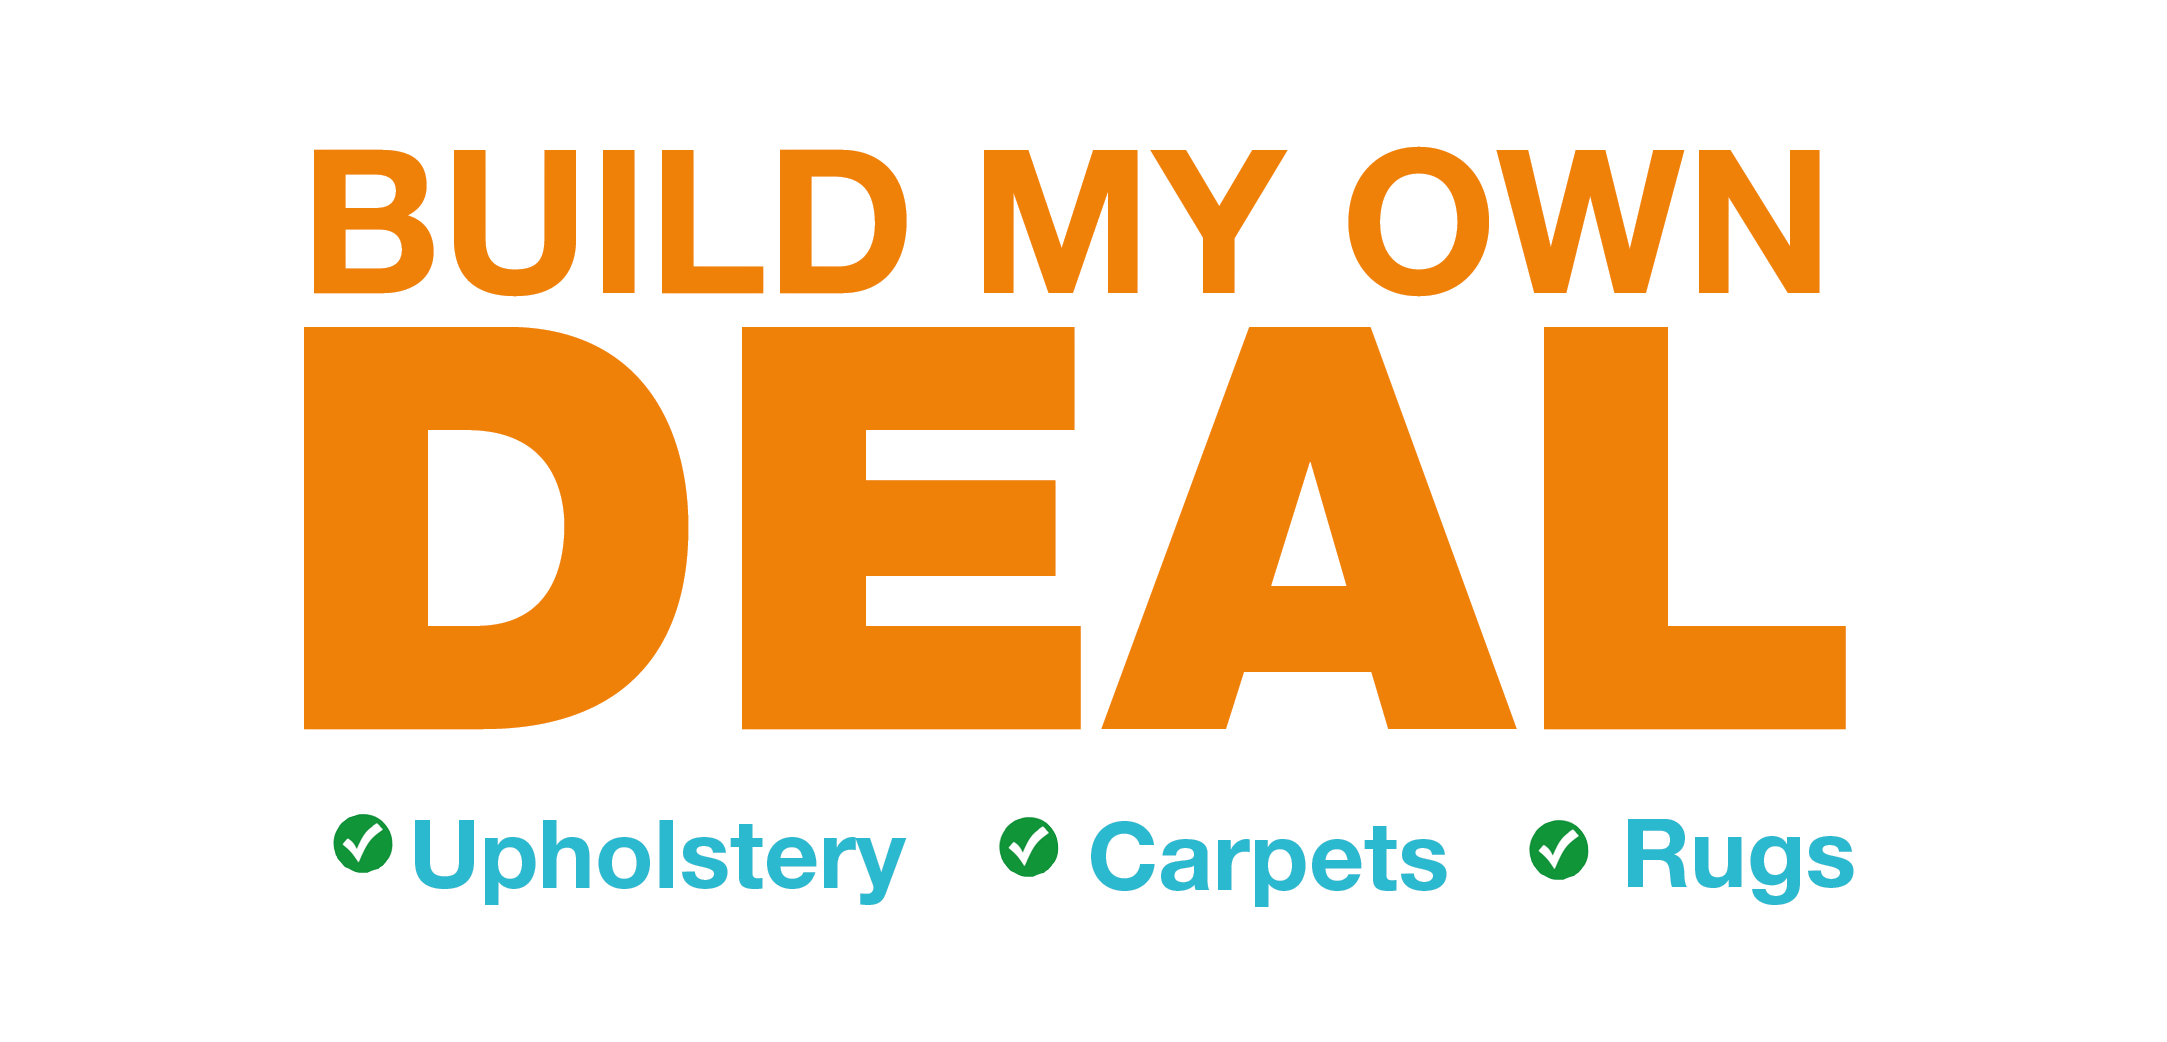 Build my own Deal